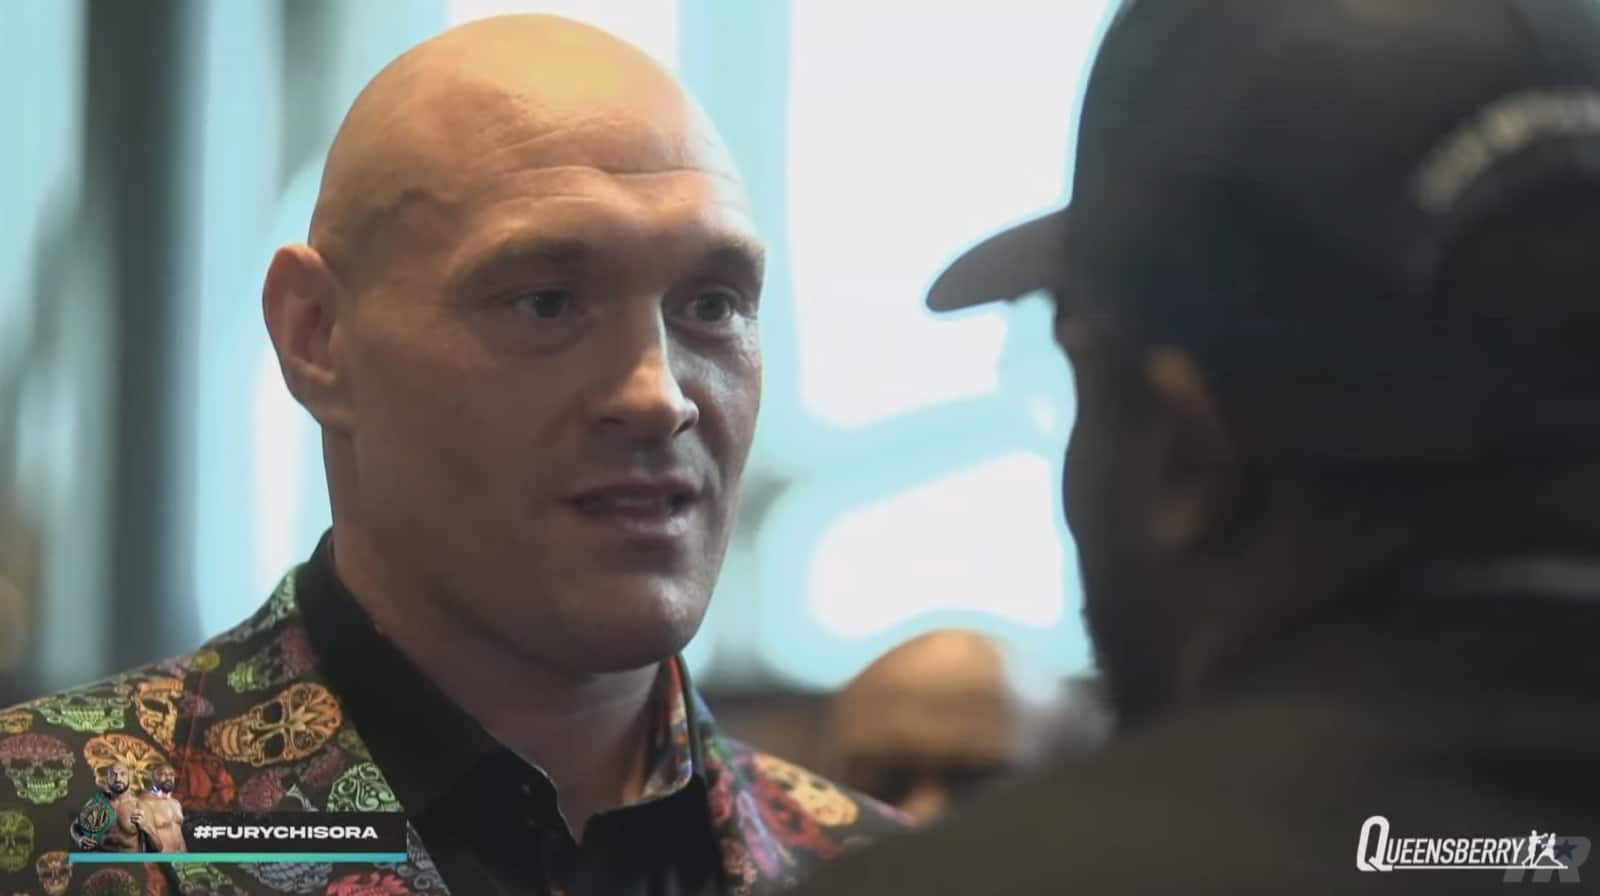 Outrage Over Fury - Chisora III Pay-Per-View Fee